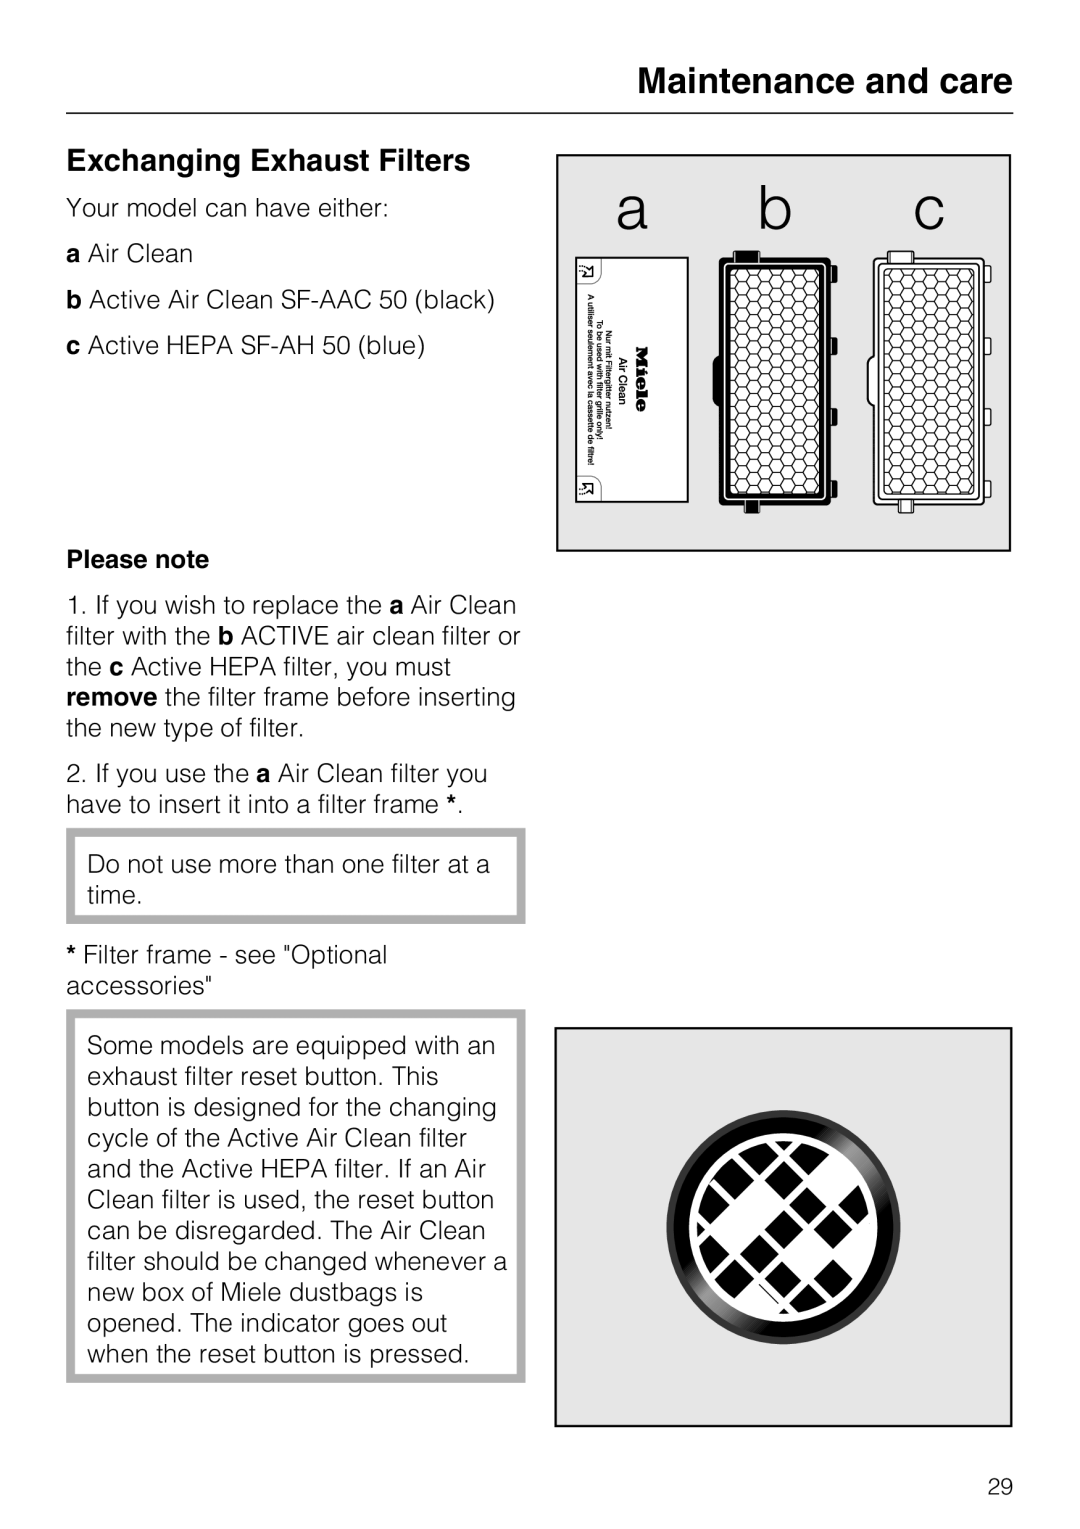 Miele S 5001 manual Exchanging Exhaust Filters, Maintenance and care, Please note 